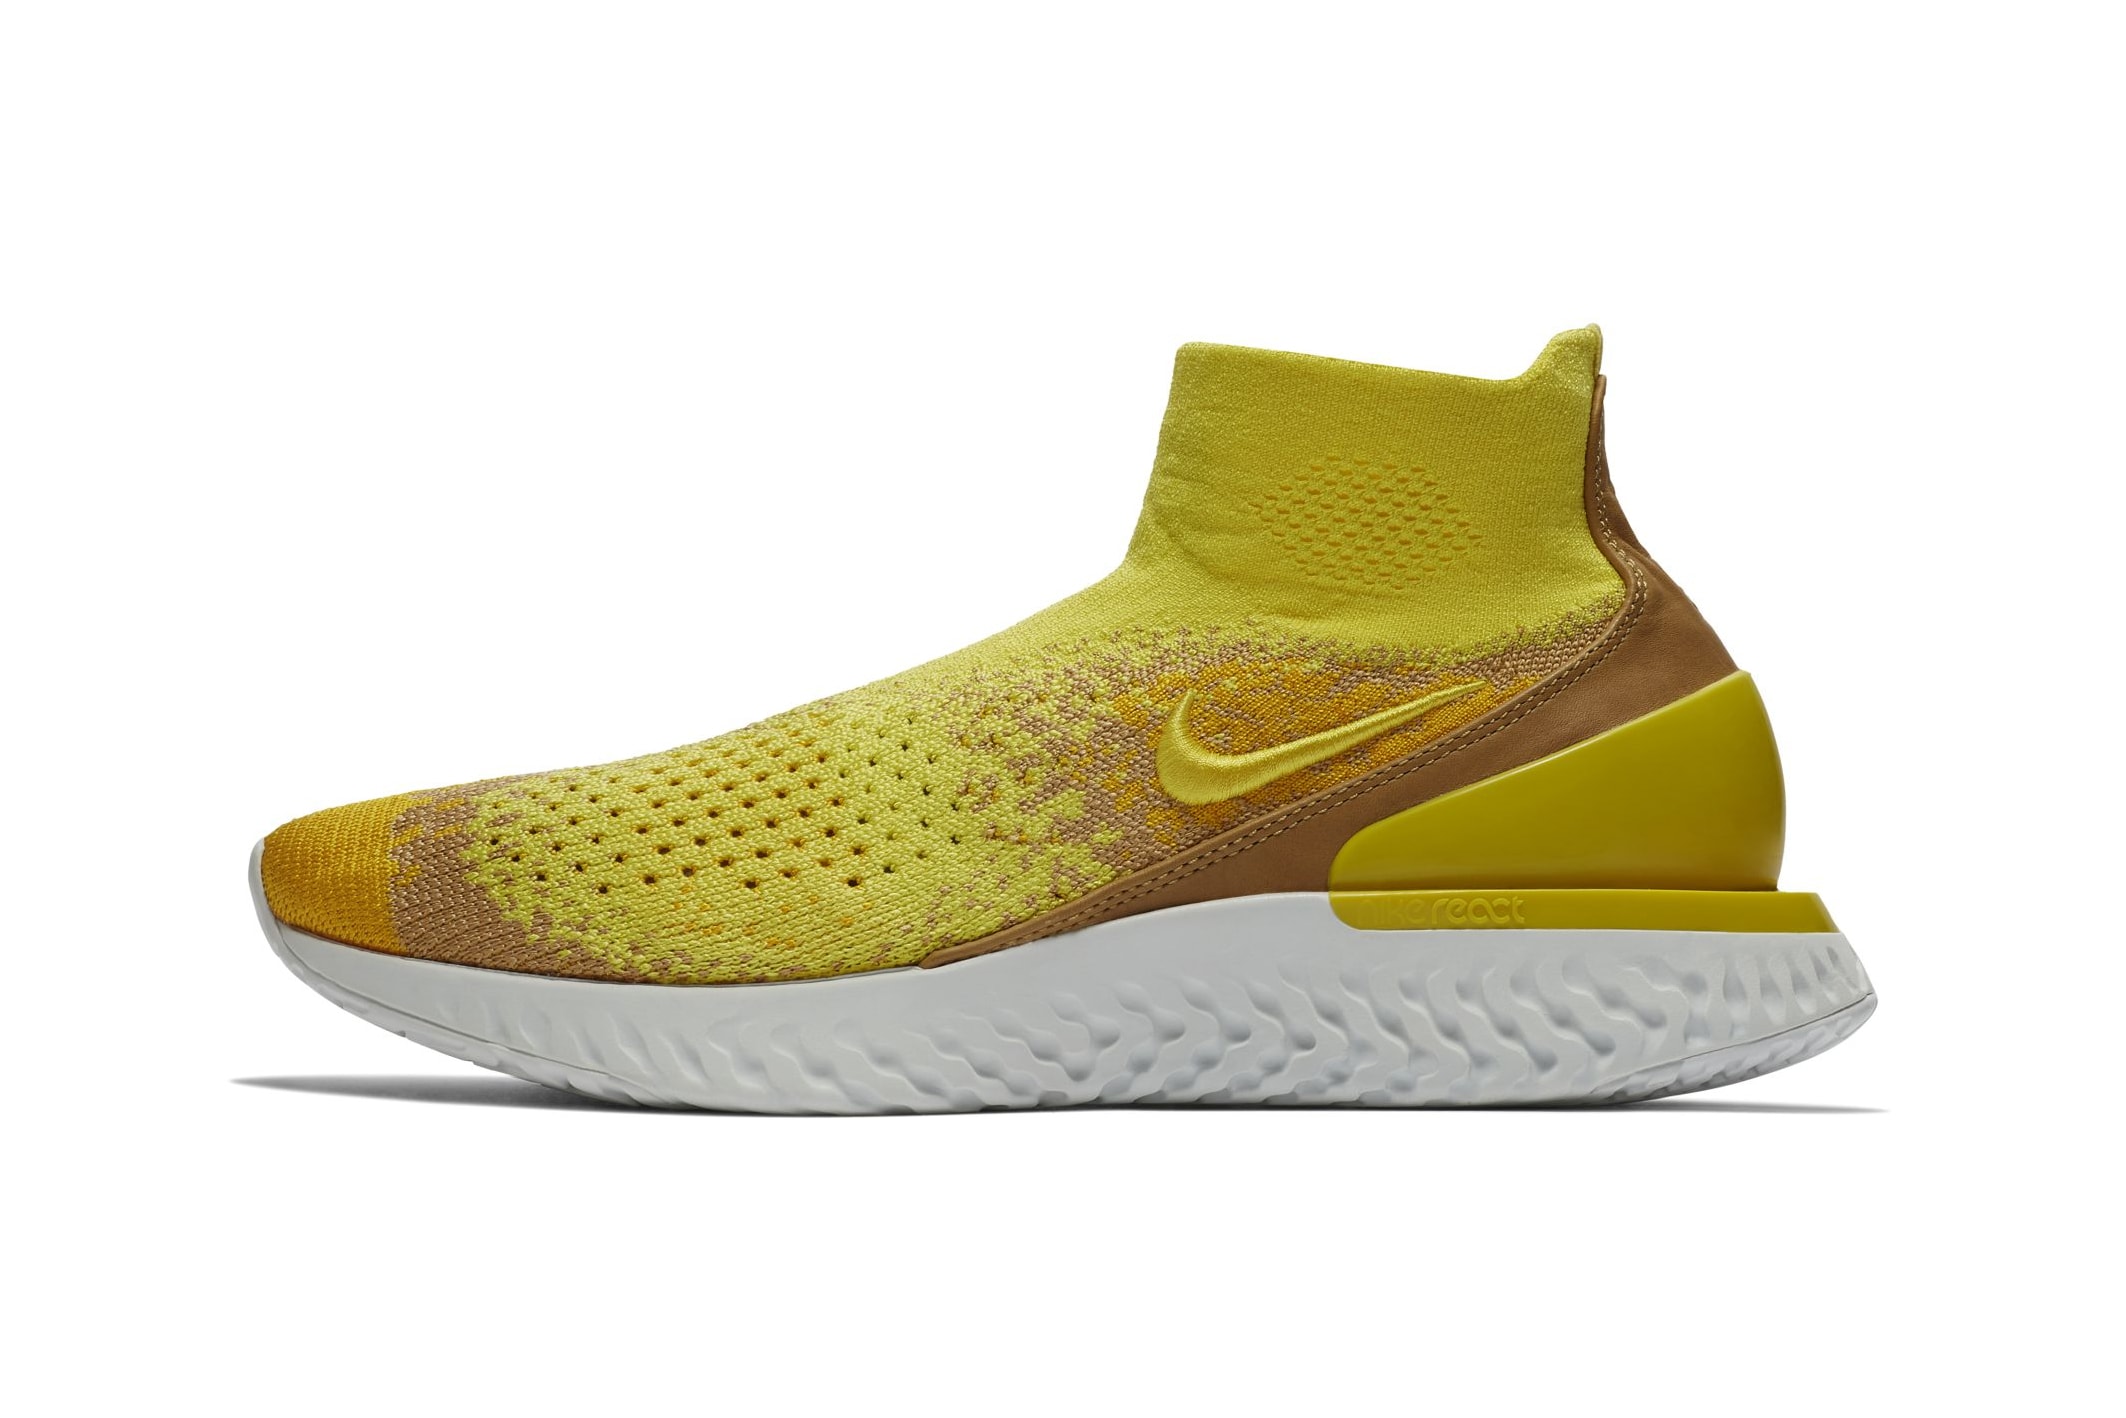 Nike Rise React Flyknit "Sonic Yellow" Release date sneaker sock colorway price purchase "SONIC YELLOW/DARK STUCCO-AMARILLO"